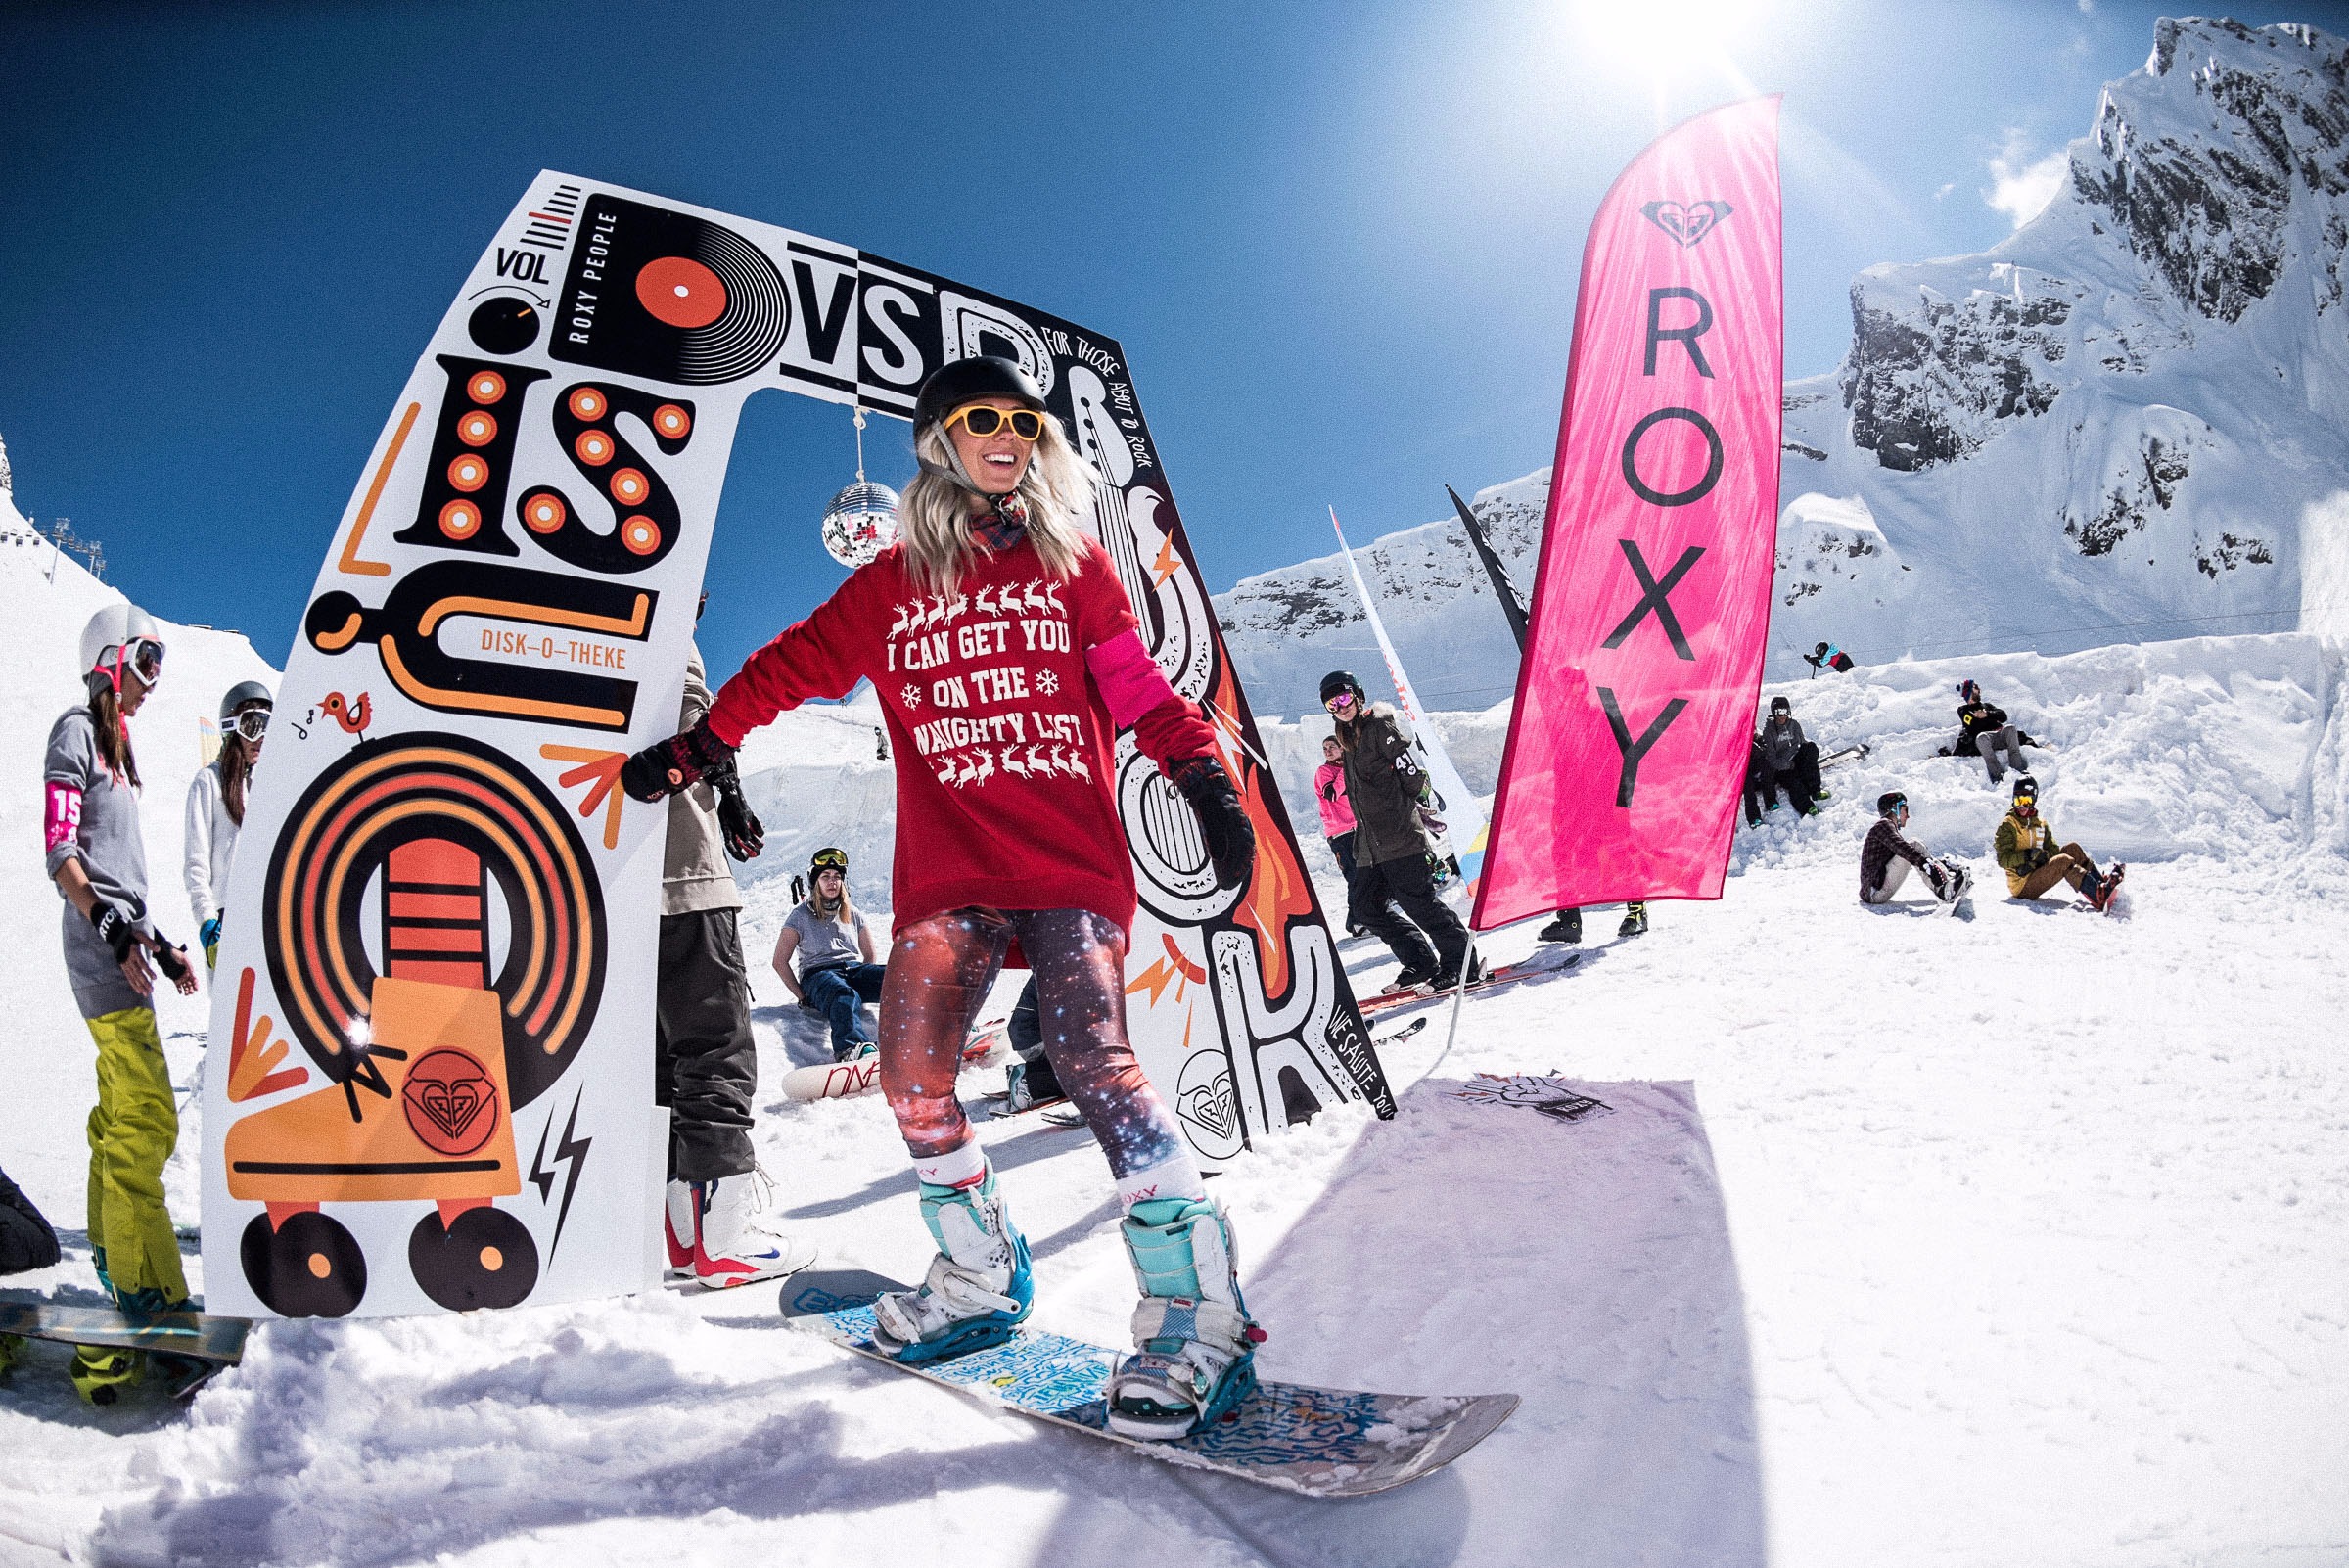 New star com. Quiksilver New Star Camp. Сноупарк New Star Camp. New Star Camp Сочи. Quiksilver New Star Camp лого.